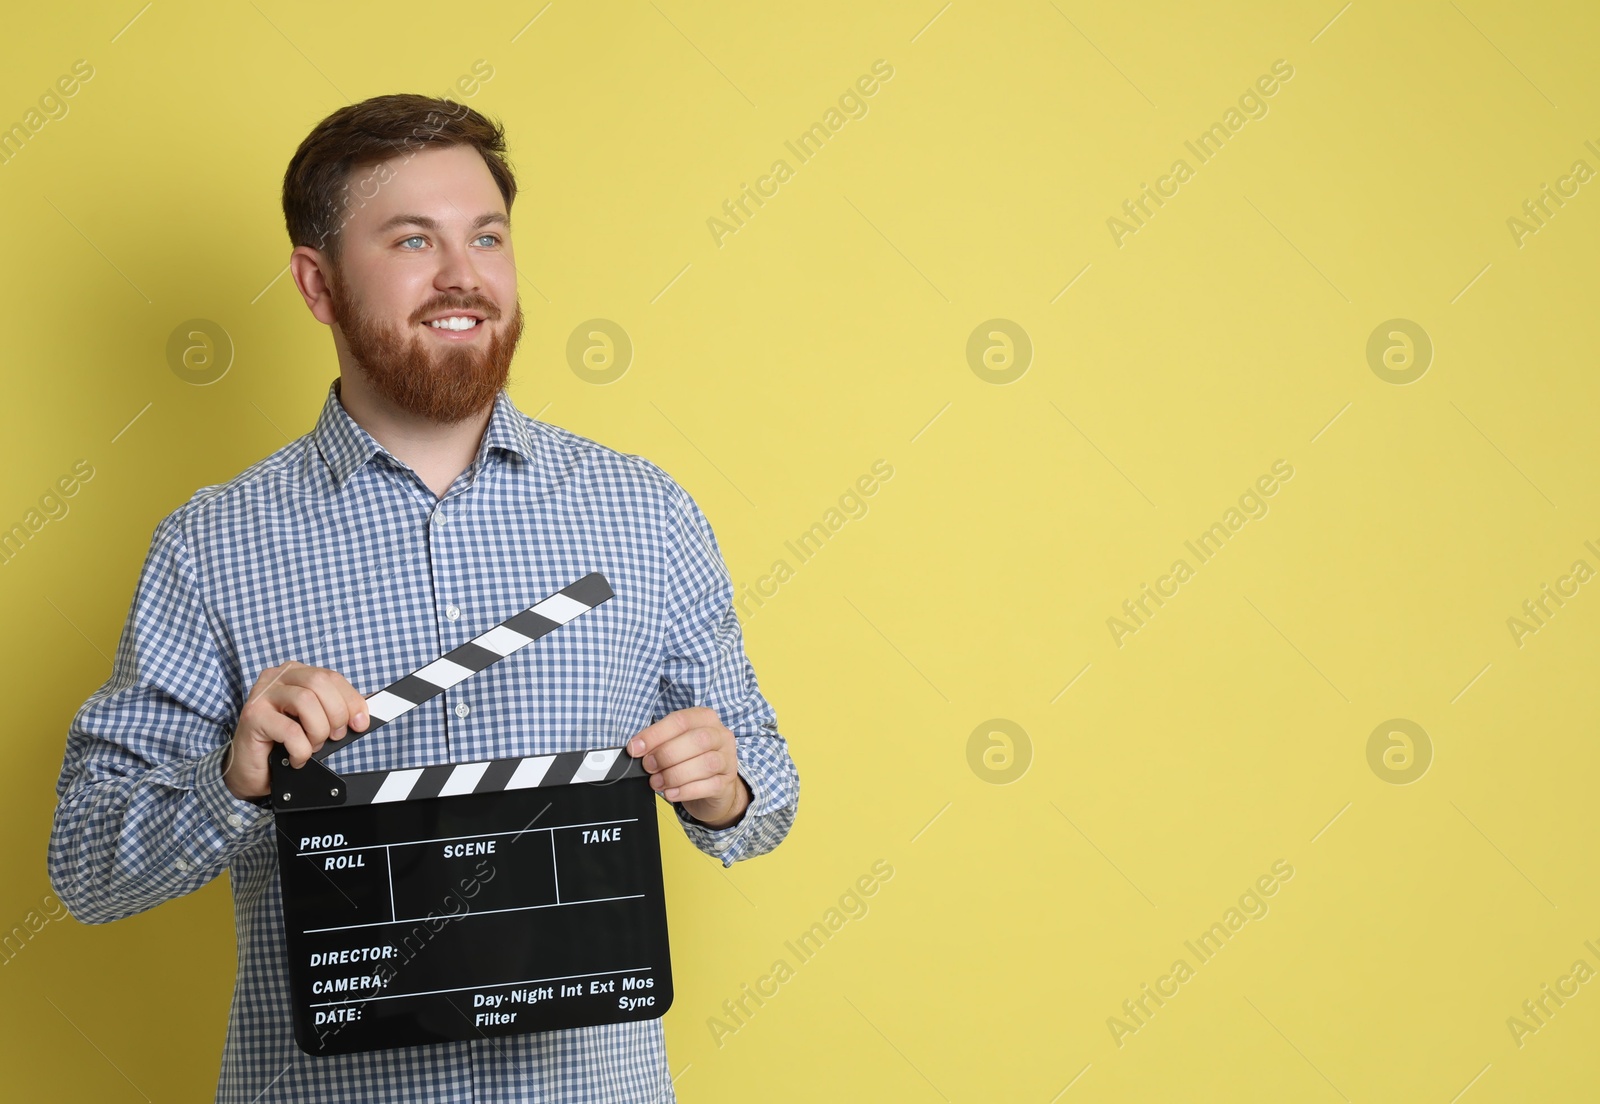 Photo of Making movie. Smiling man with clapperboard on yellow background. Space for text